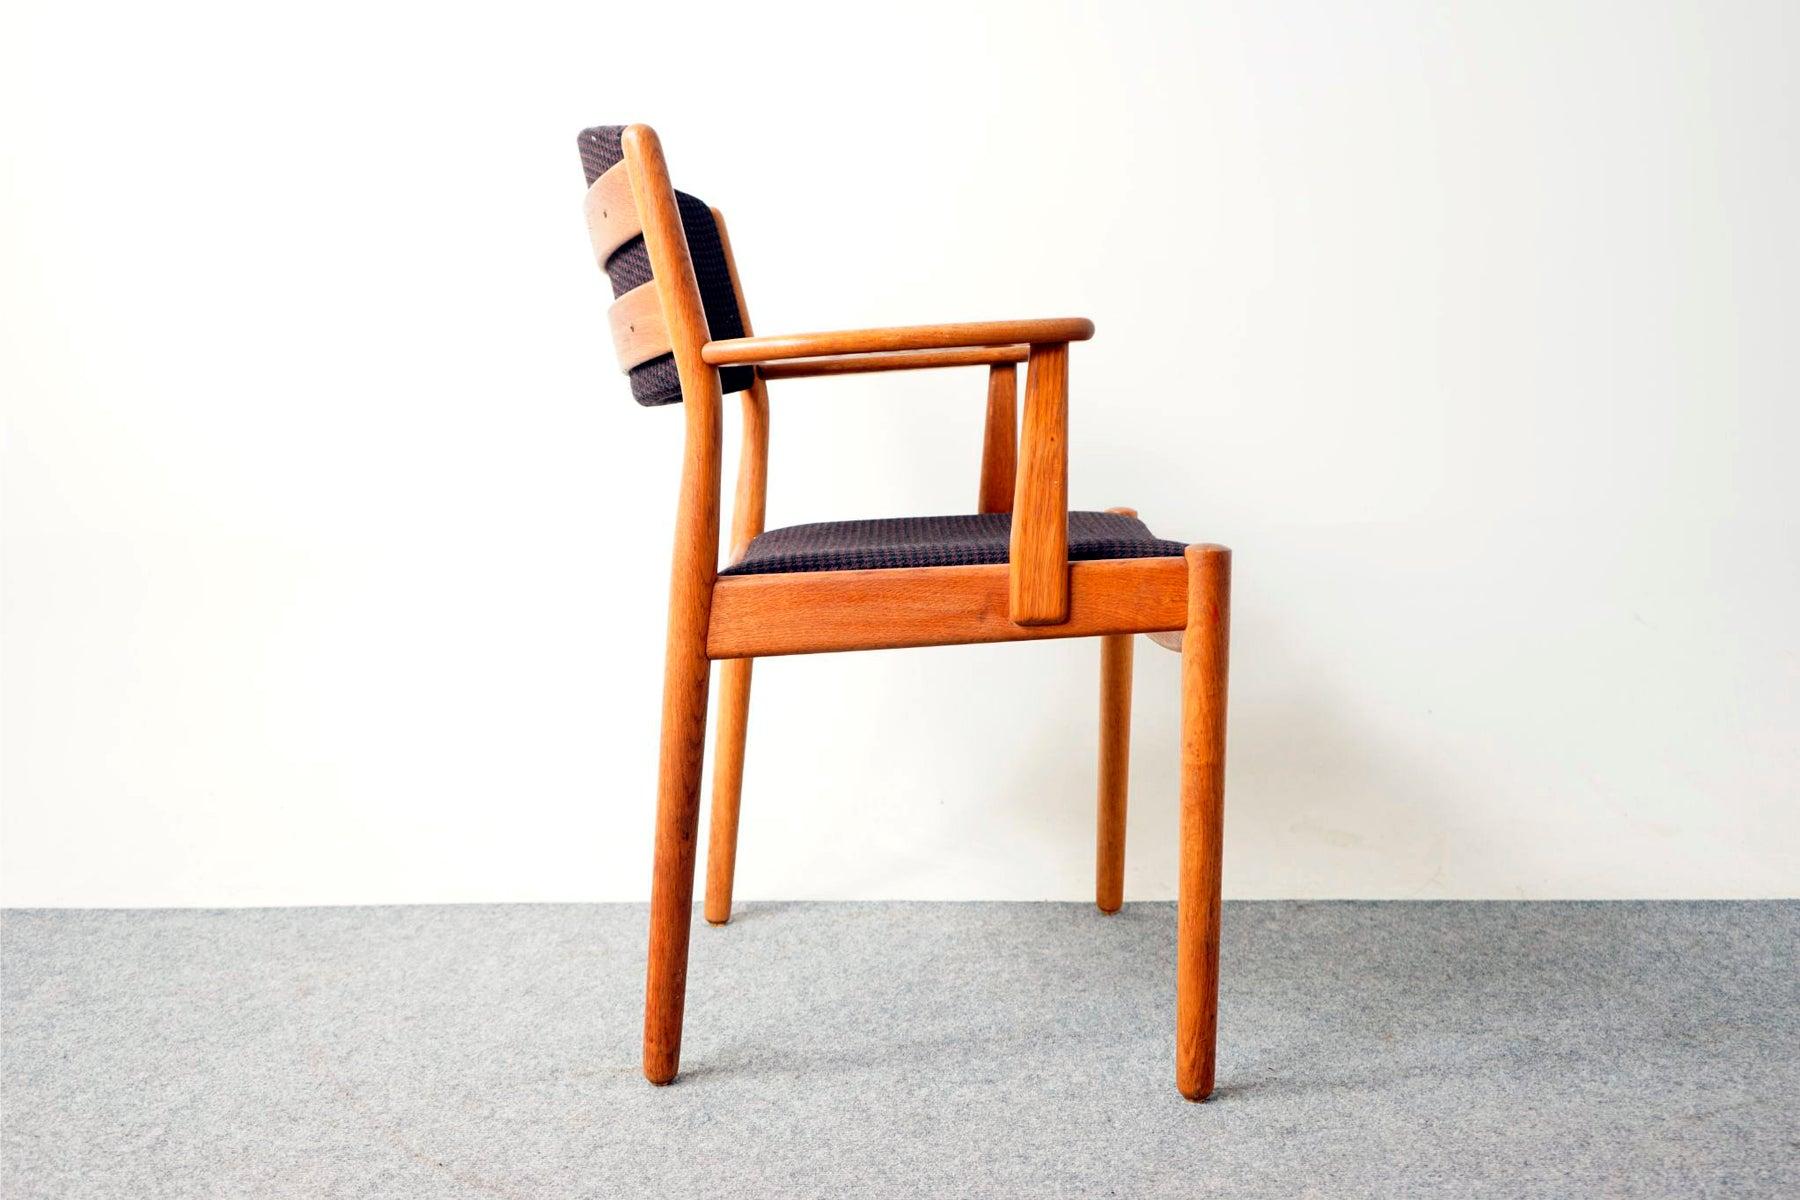 Danish Mid-Century Modern Scandinavian Oak Arm Chair by Poul Volther for FDB